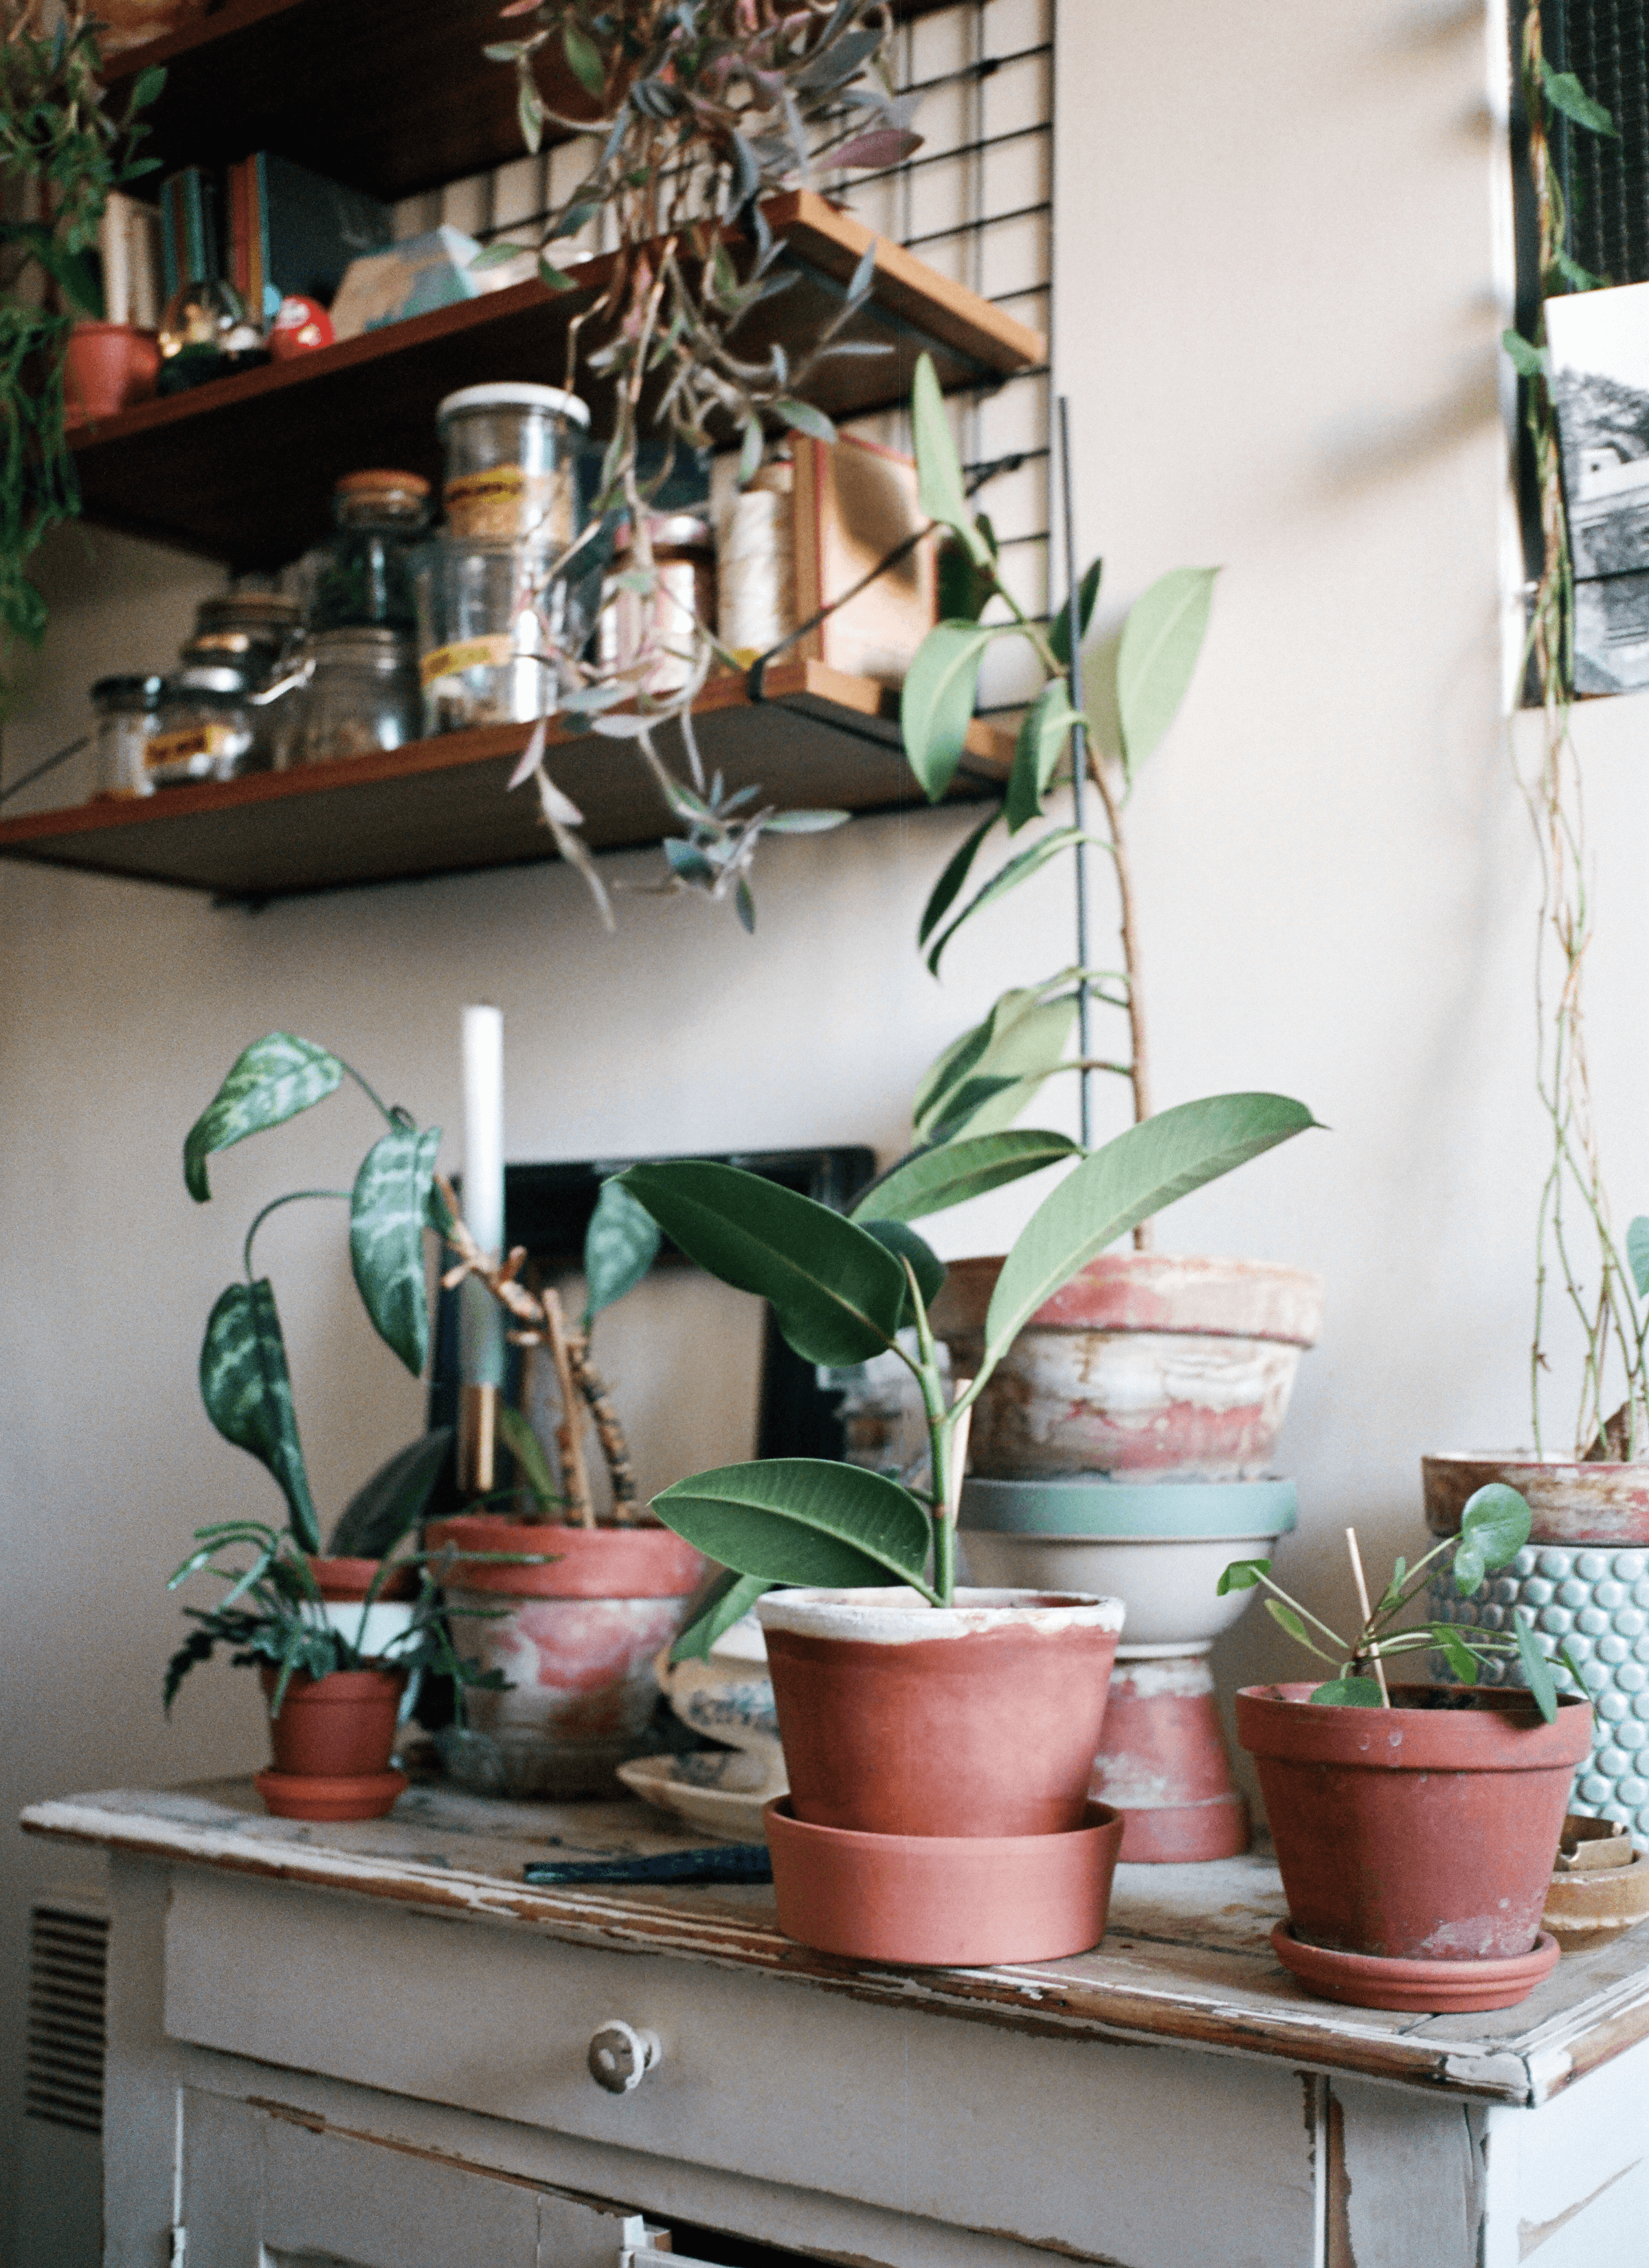 A collection of terracotta potted plants is on the table while a wall shelf is filled with jars, books and other different stuff.